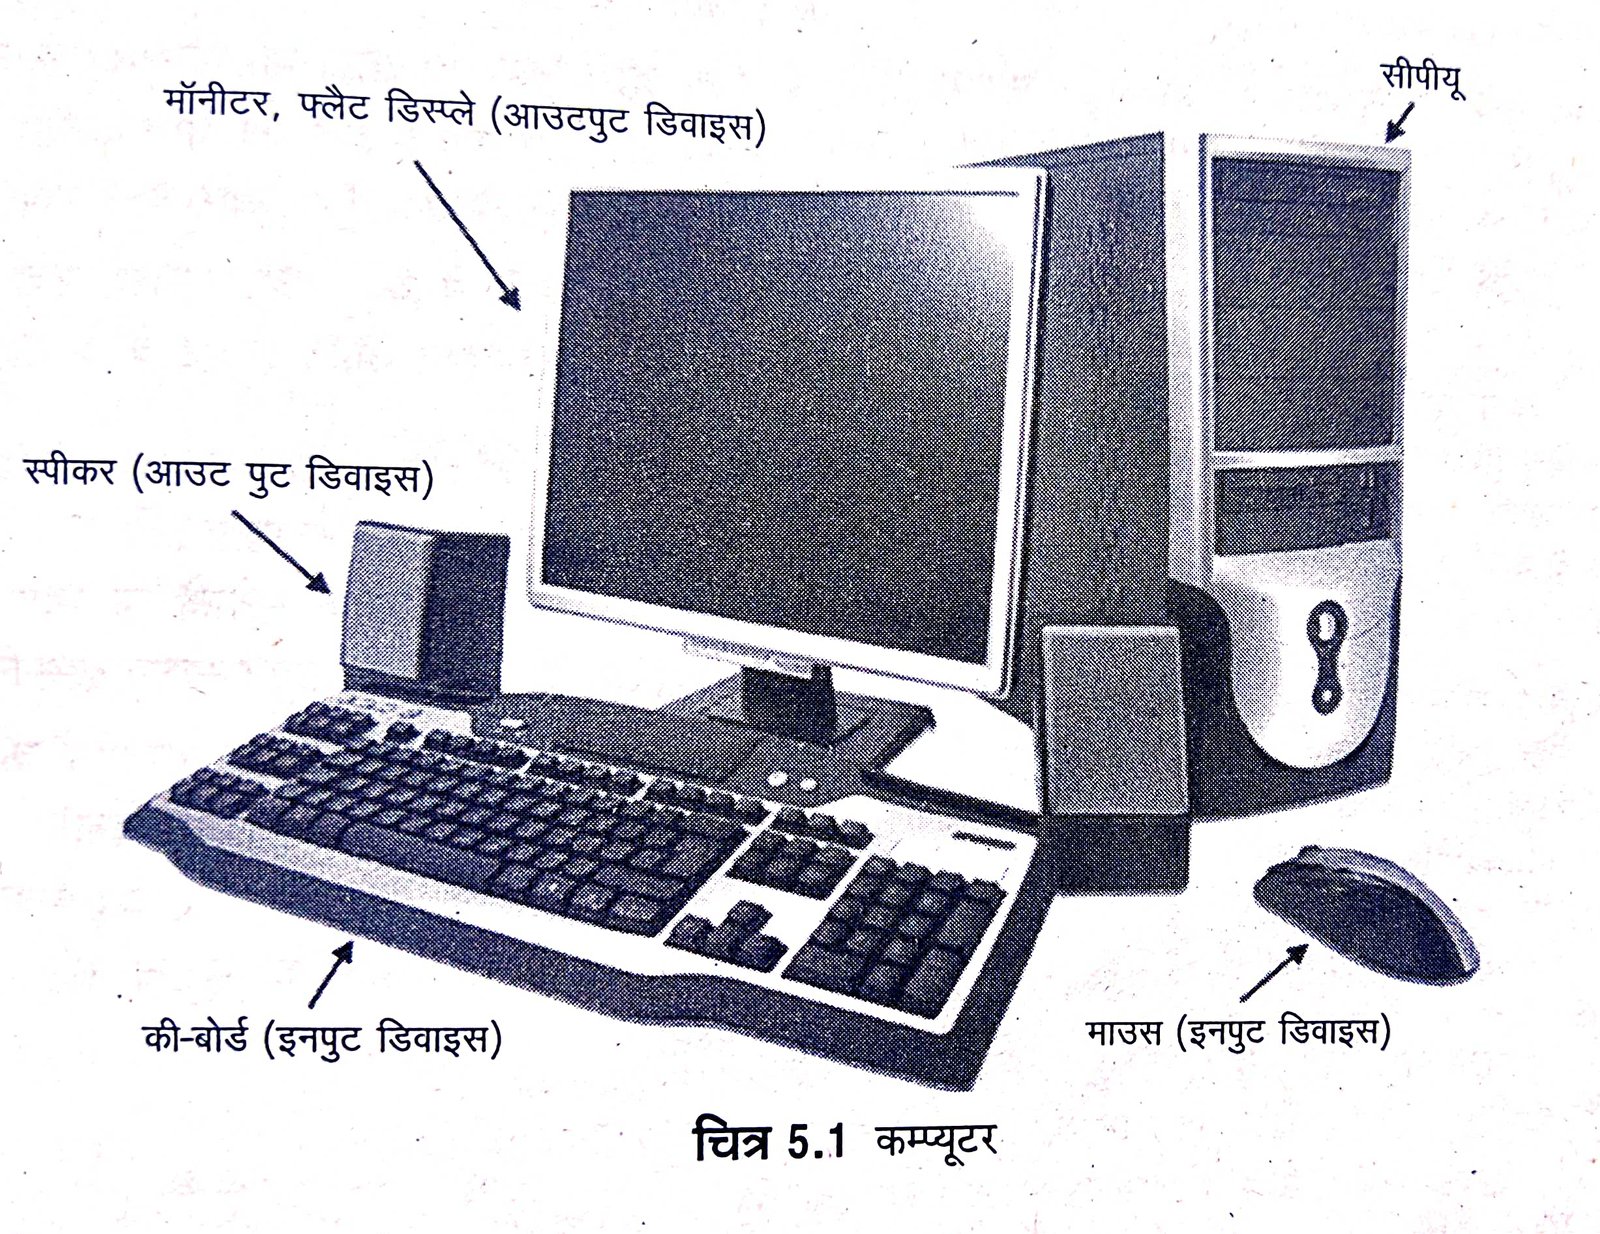 Meaning of Computer in Hindi